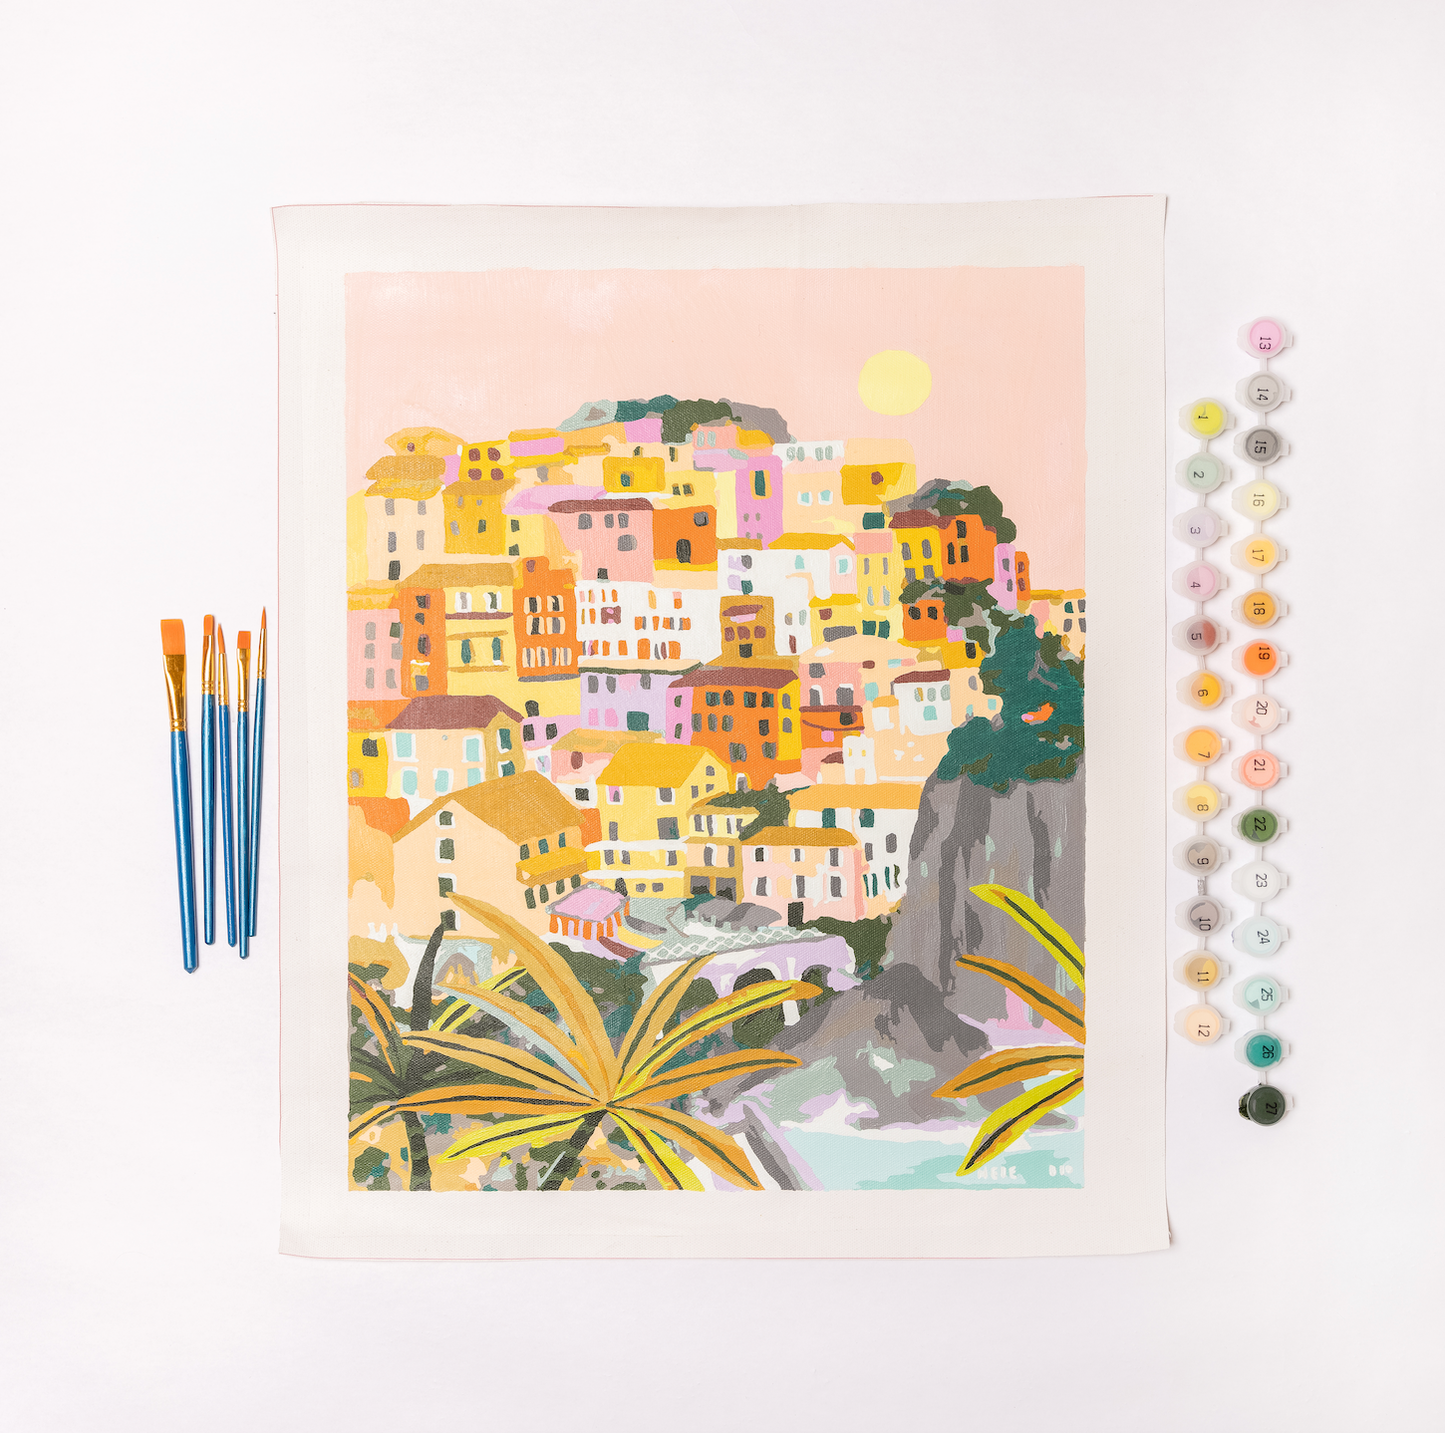 Cinque Terre Paint by Numbers Deluxe